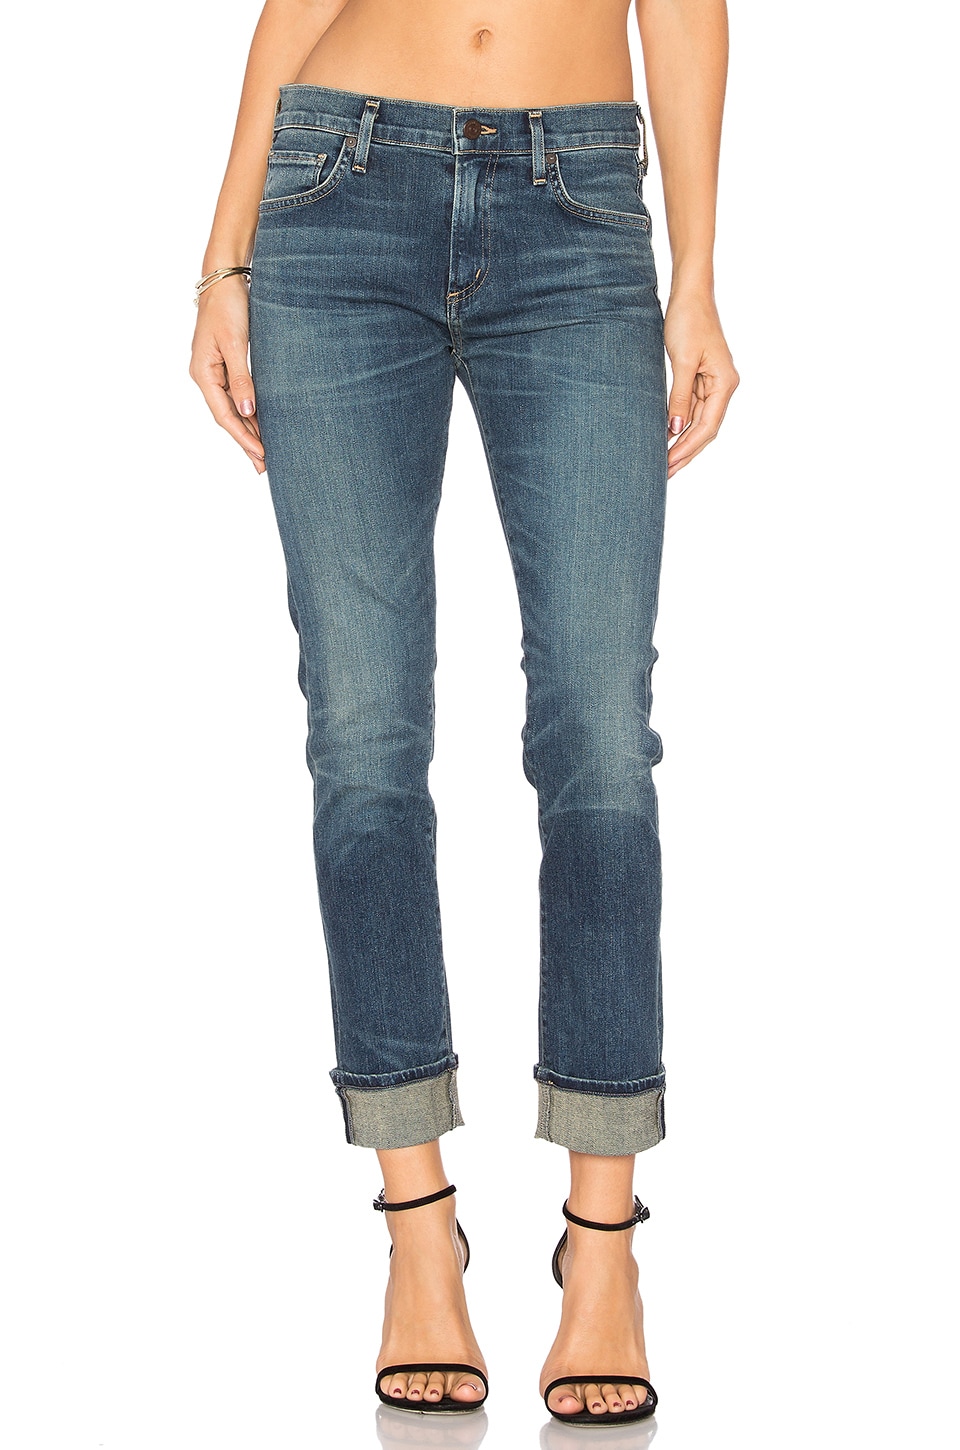 Citizens of Humanity Jazmin Ankle Slim Straight in Euclid | REVOLVE